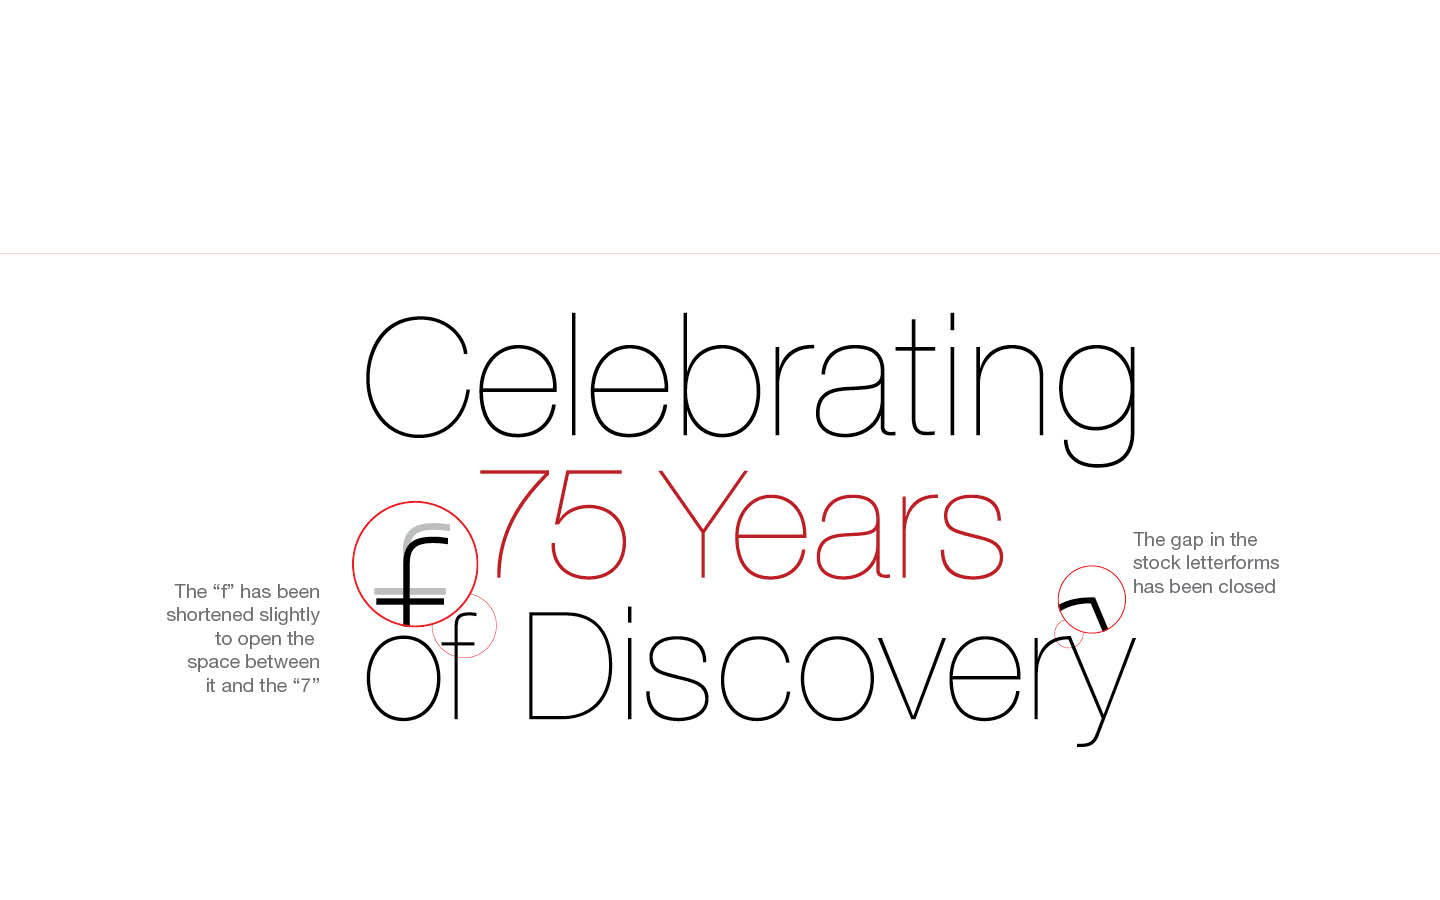 Avery Dennison 75th anniversary stacked tagline typography- Celebrating 75 Years of Discovery